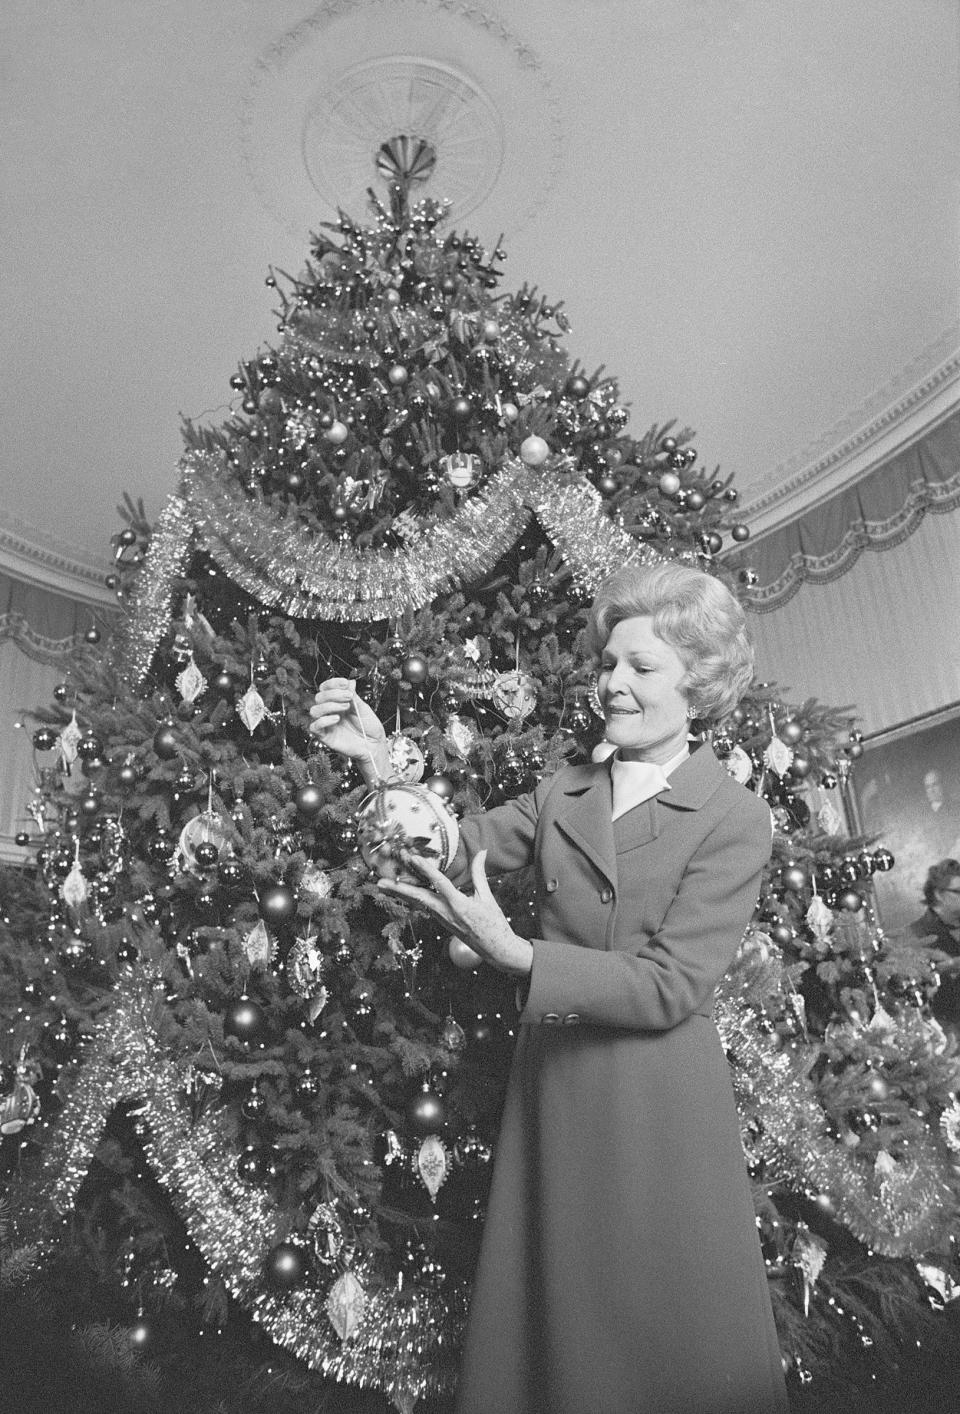 Here's First Lady Patricia Nixon decorating the Christmas Tree at the White House in Washington D.C. on Dec. 14, 1970. Burke says Melania drew inspiration from this year's approach. | Wally McNamee—Corbis via Getty Images